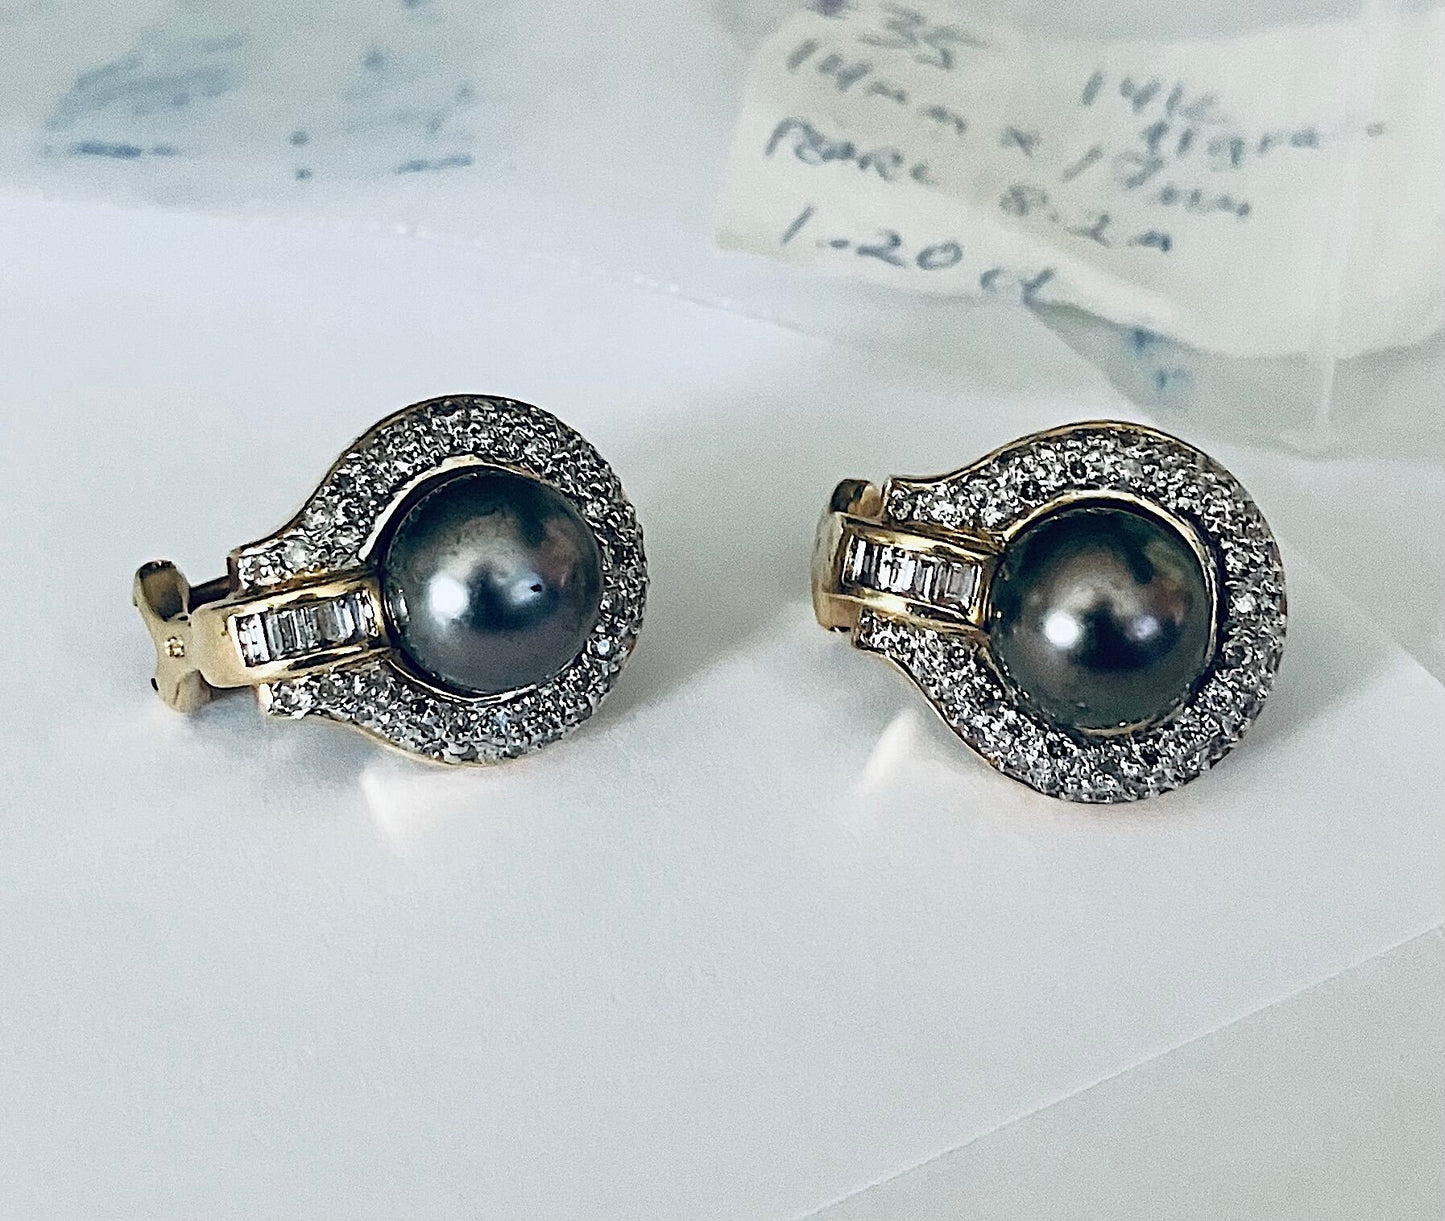 Natural Black Pearls 1.19ct South Sea Round Cut Diamond Earrings 14kt Yellow Gold